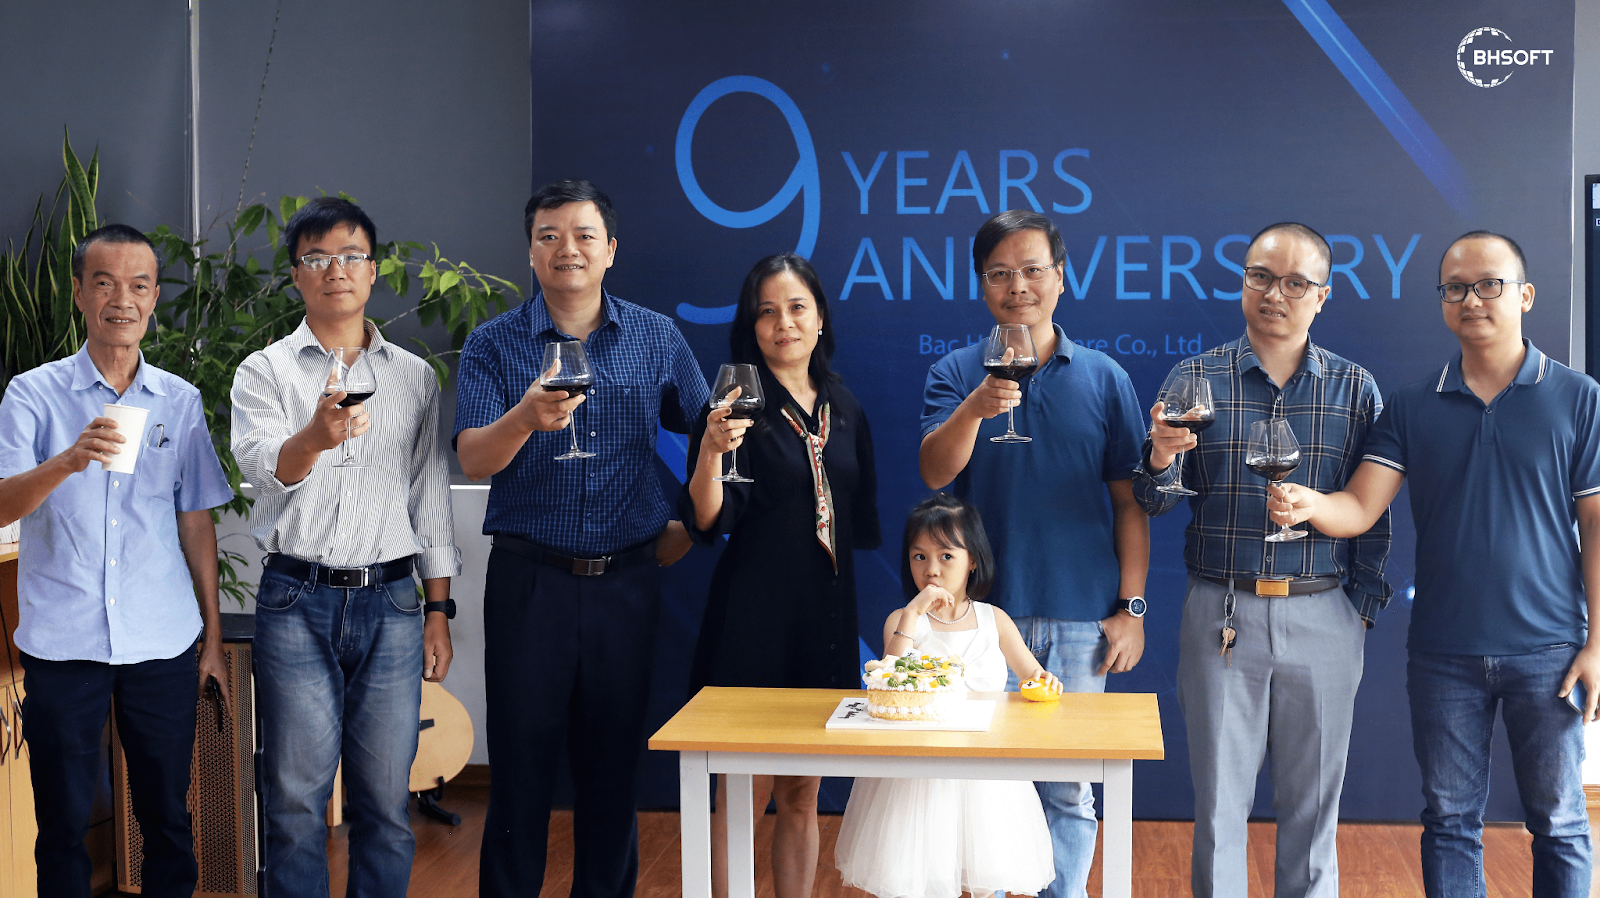 BHSoft Celebrating 9 Years of Excellence